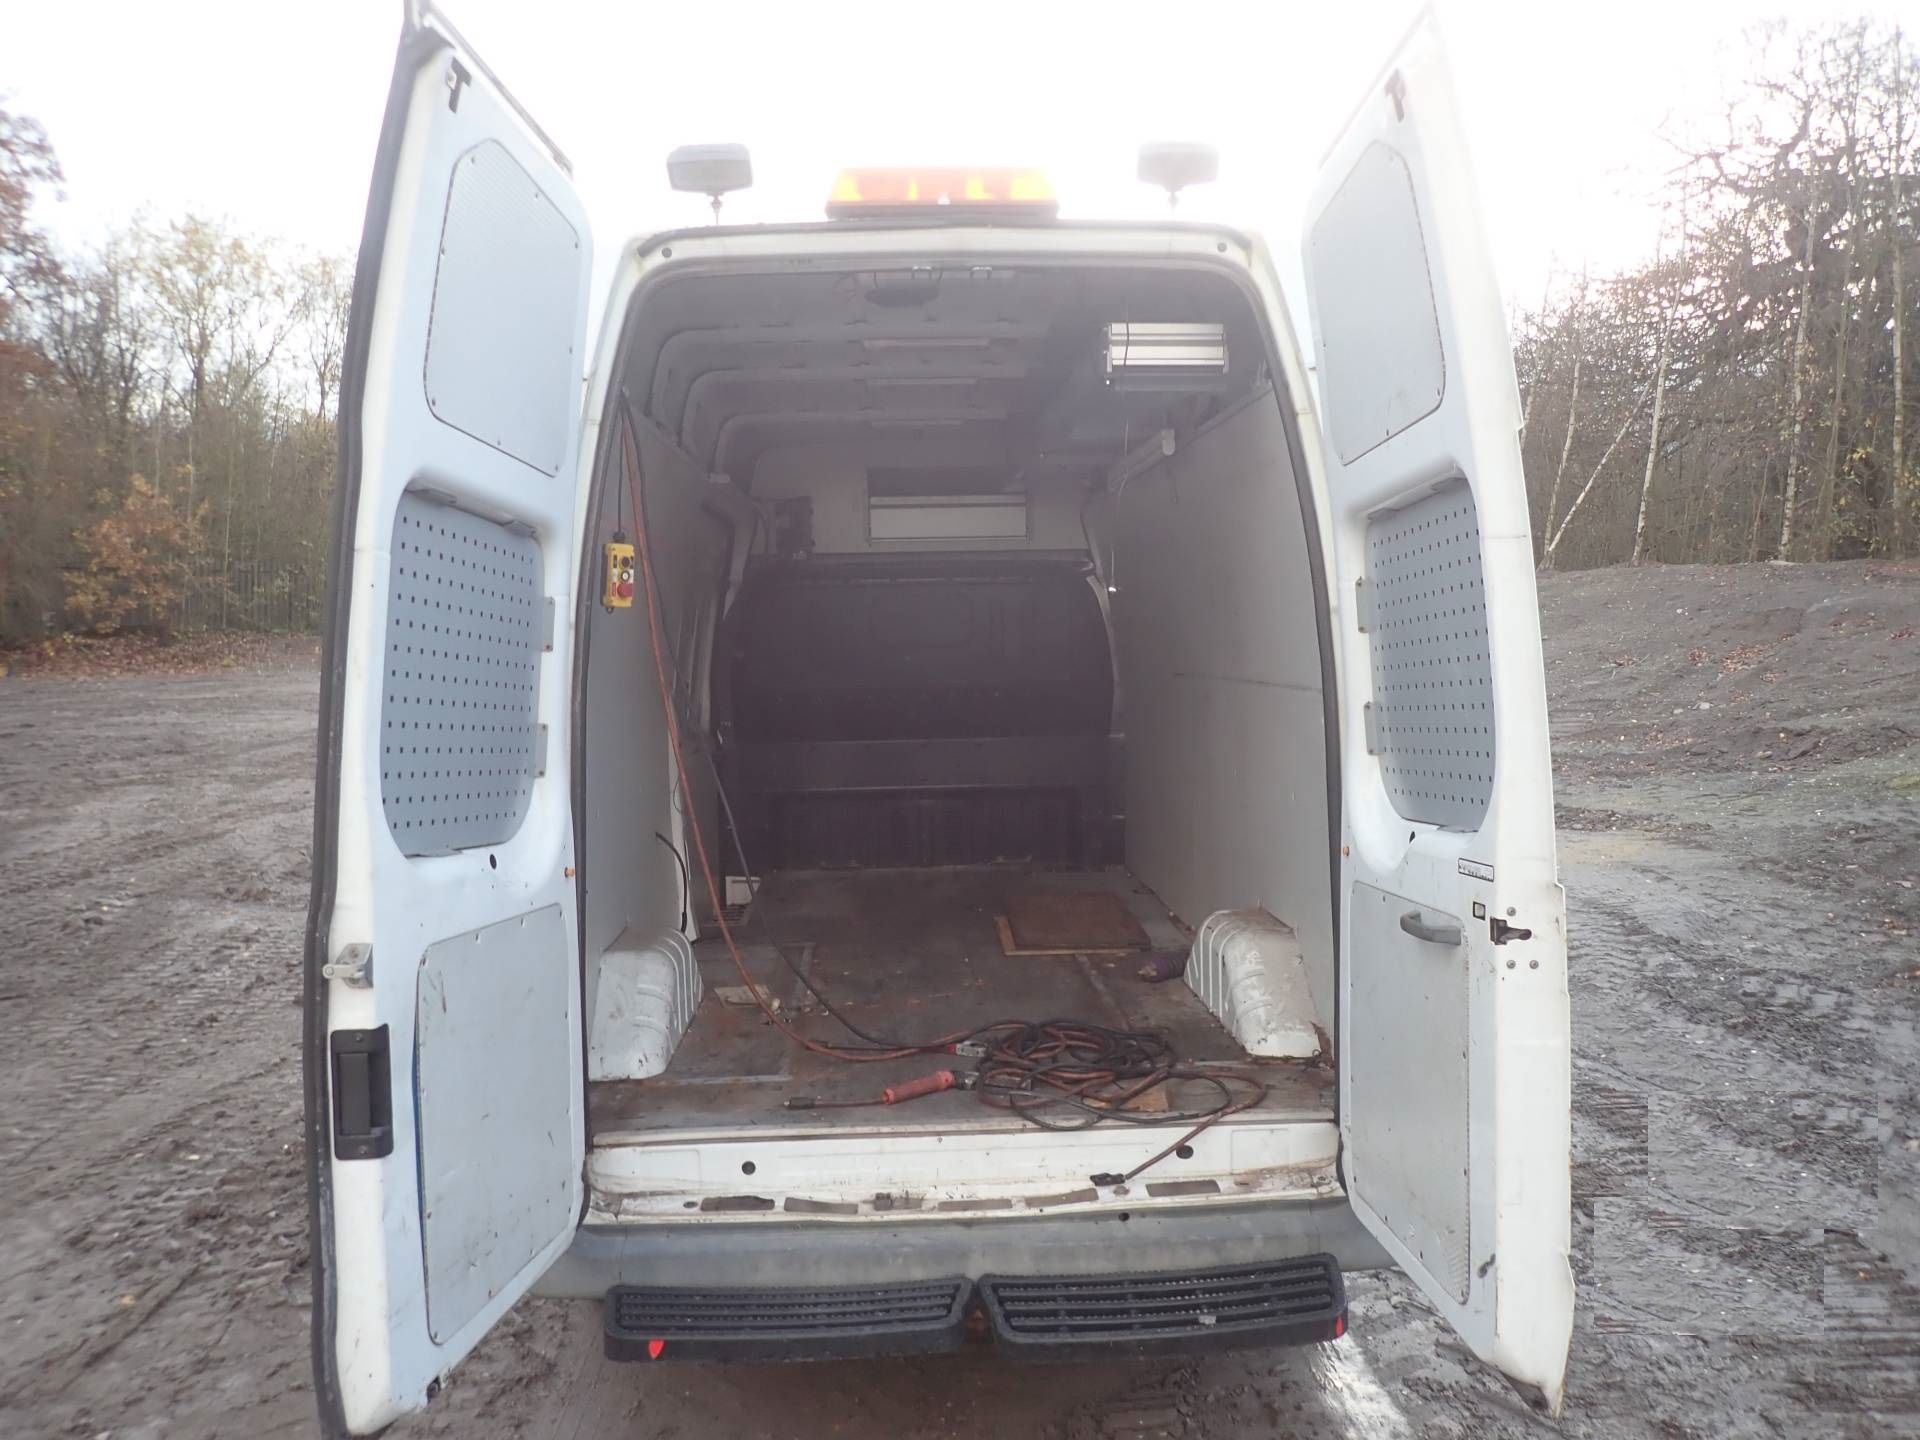 2008 Ford Transit 350 LWB 115 RWD 5 Door Panel Van - CL505 - Location: Corby, Northamptonshire - Image 7 of 12